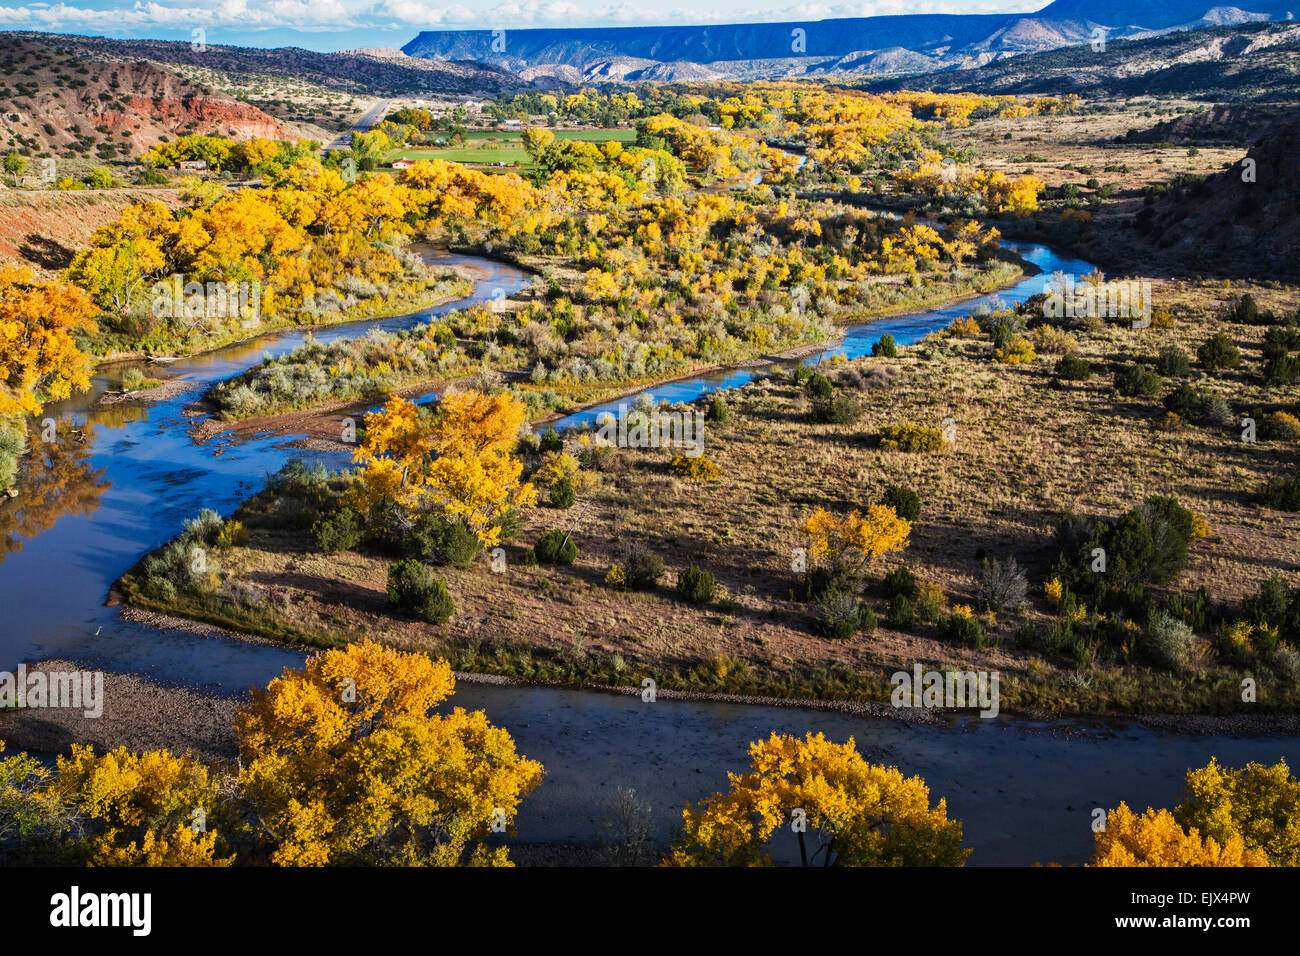 In October the cottonwood trees along the Chama River near the village of Abiquiu in  northern New Mexico. Stock Photo